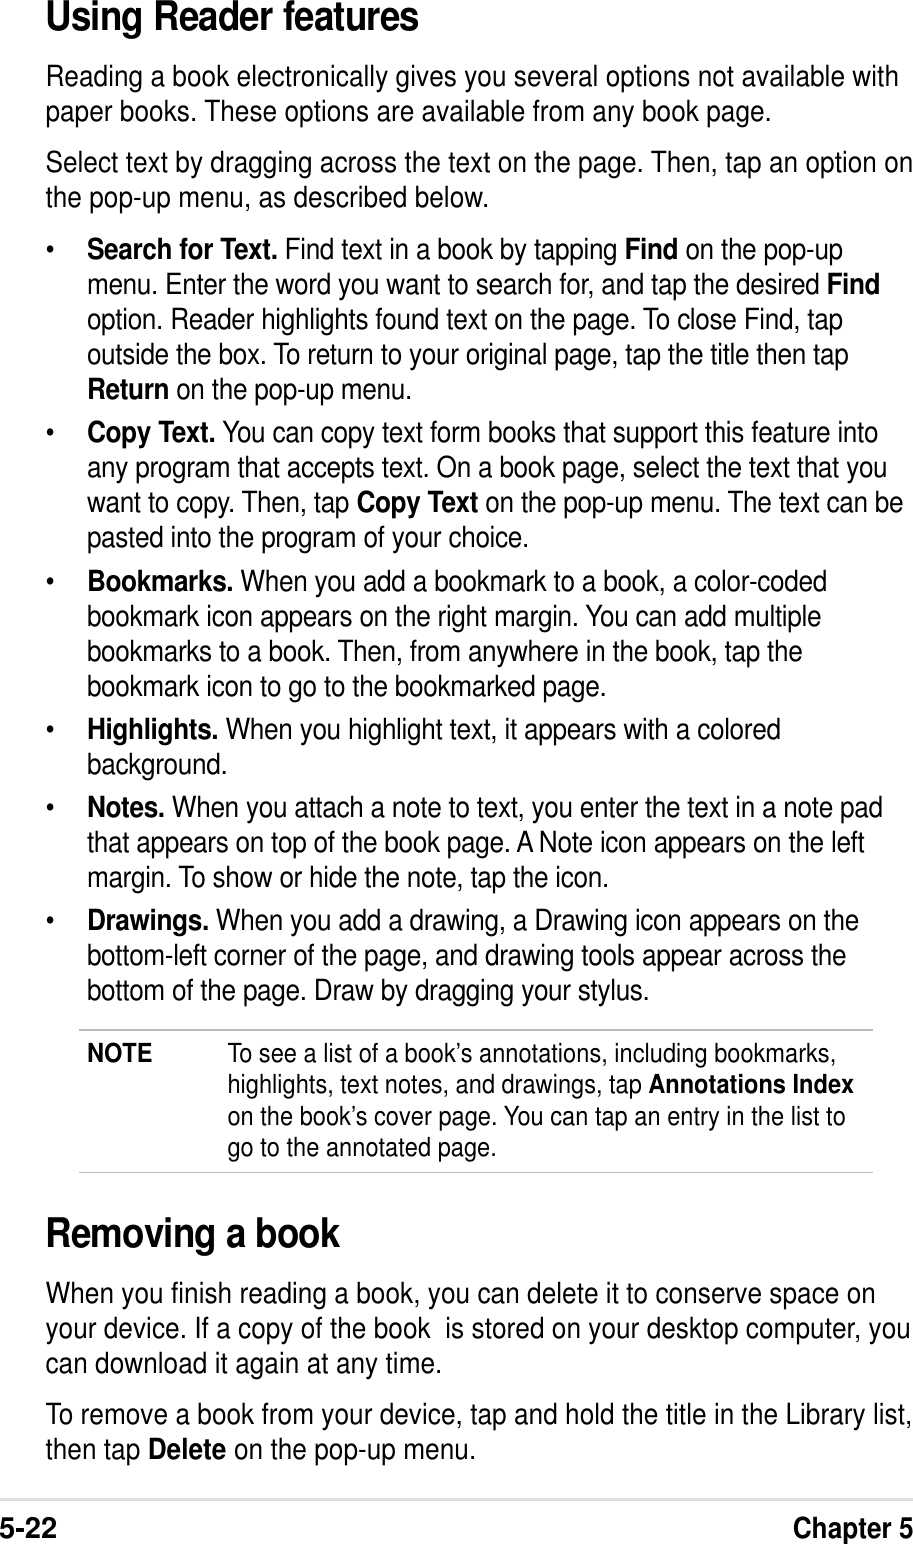 5-22Chapter 5Using Reader featuresReading a book electronically gives you several options not available withpaper books. These options are available from any book page.Select text by dragging across the text on the page. Then, tap an option onthe pop-up menu, as described below.•Search for Text. Find text in a book by tapping Find on the pop-upmenu. Enter the word you want to search for, and tap the desired Findoption. Reader highlights found text on the page. To close Find, tapoutside the box. To return to your original page, tap the title then tapReturn on the pop-up menu.•Copy Text. You can copy text form books that support this feature intoany program that accepts text. On a book page, select the text that youwant to copy. Then, tap Copy Text on the pop-up menu. The text can bepasted into the program of your choice.•Bookmarks. When you add a bookmark to a book, a color-codedbookmark icon appears on the right margin. You can add multiplebookmarks to a book. Then, from anywhere in the book, tap thebookmark icon to go to the bookmarked page.•Highlights. When you highlight text, it appears with a coloredbackground.•Notes. When you attach a note to text, you enter the text in a note padthat appears on top of the book page. A Note icon appears on the leftmargin. To show or hide the note, tap the icon.•Drawings. When you add a drawing, a Drawing icon appears on thebottom-left corner of the page, and drawing tools appear across thebottom of the page. Draw by dragging your stylus.NOTE To see a list of a book’s annotations, including bookmarks,highlights, text notes, and drawings, tap Annotations Indexon the book’s cover page. You can tap an entry in the list togo to the annotated page.Removing a bookWhen you finish reading a book, you can delete it to conserve space onyour device. If a copy of the book  is stored on your desktop computer, youcan download it again at any time.To remove a book from your device, tap and hold the title in the Library list,then tap Delete on the pop-up menu.